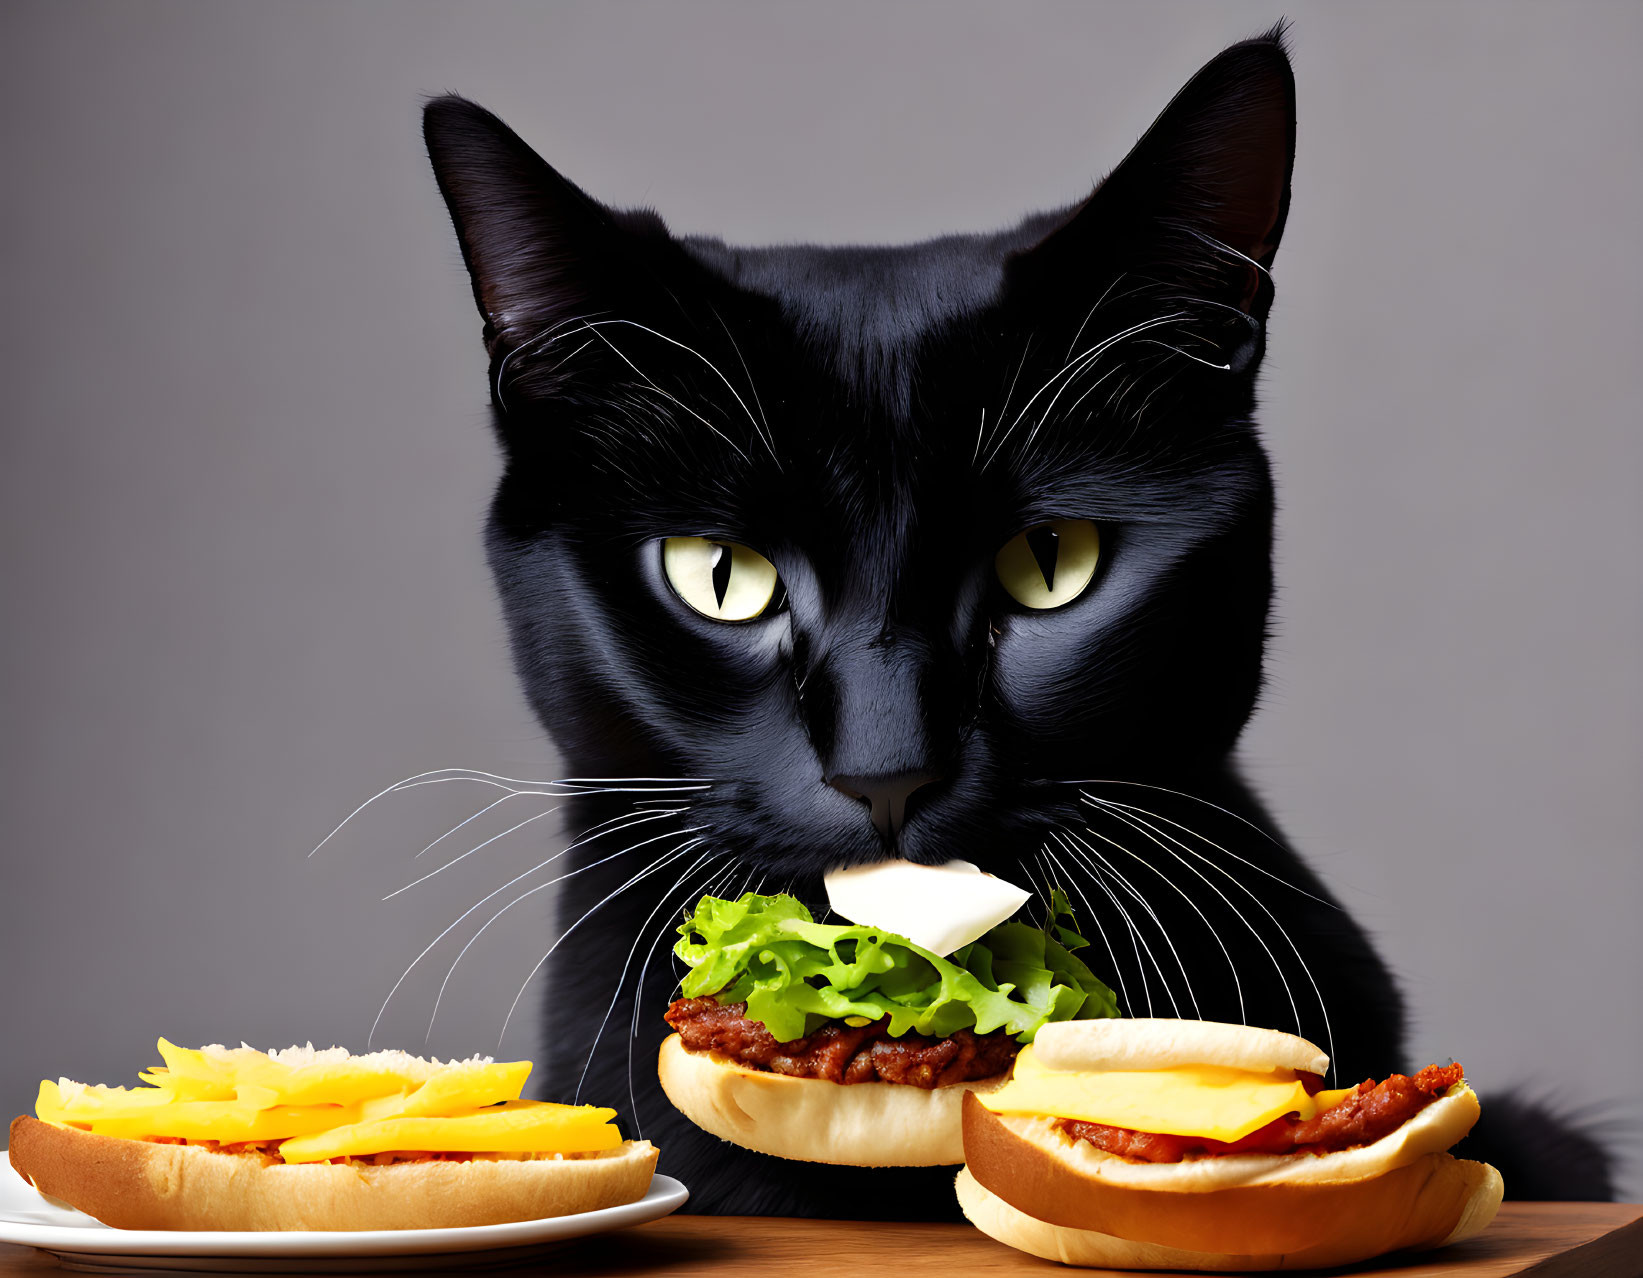 Black cat with cheeseburger, sandwich, and fries on table.